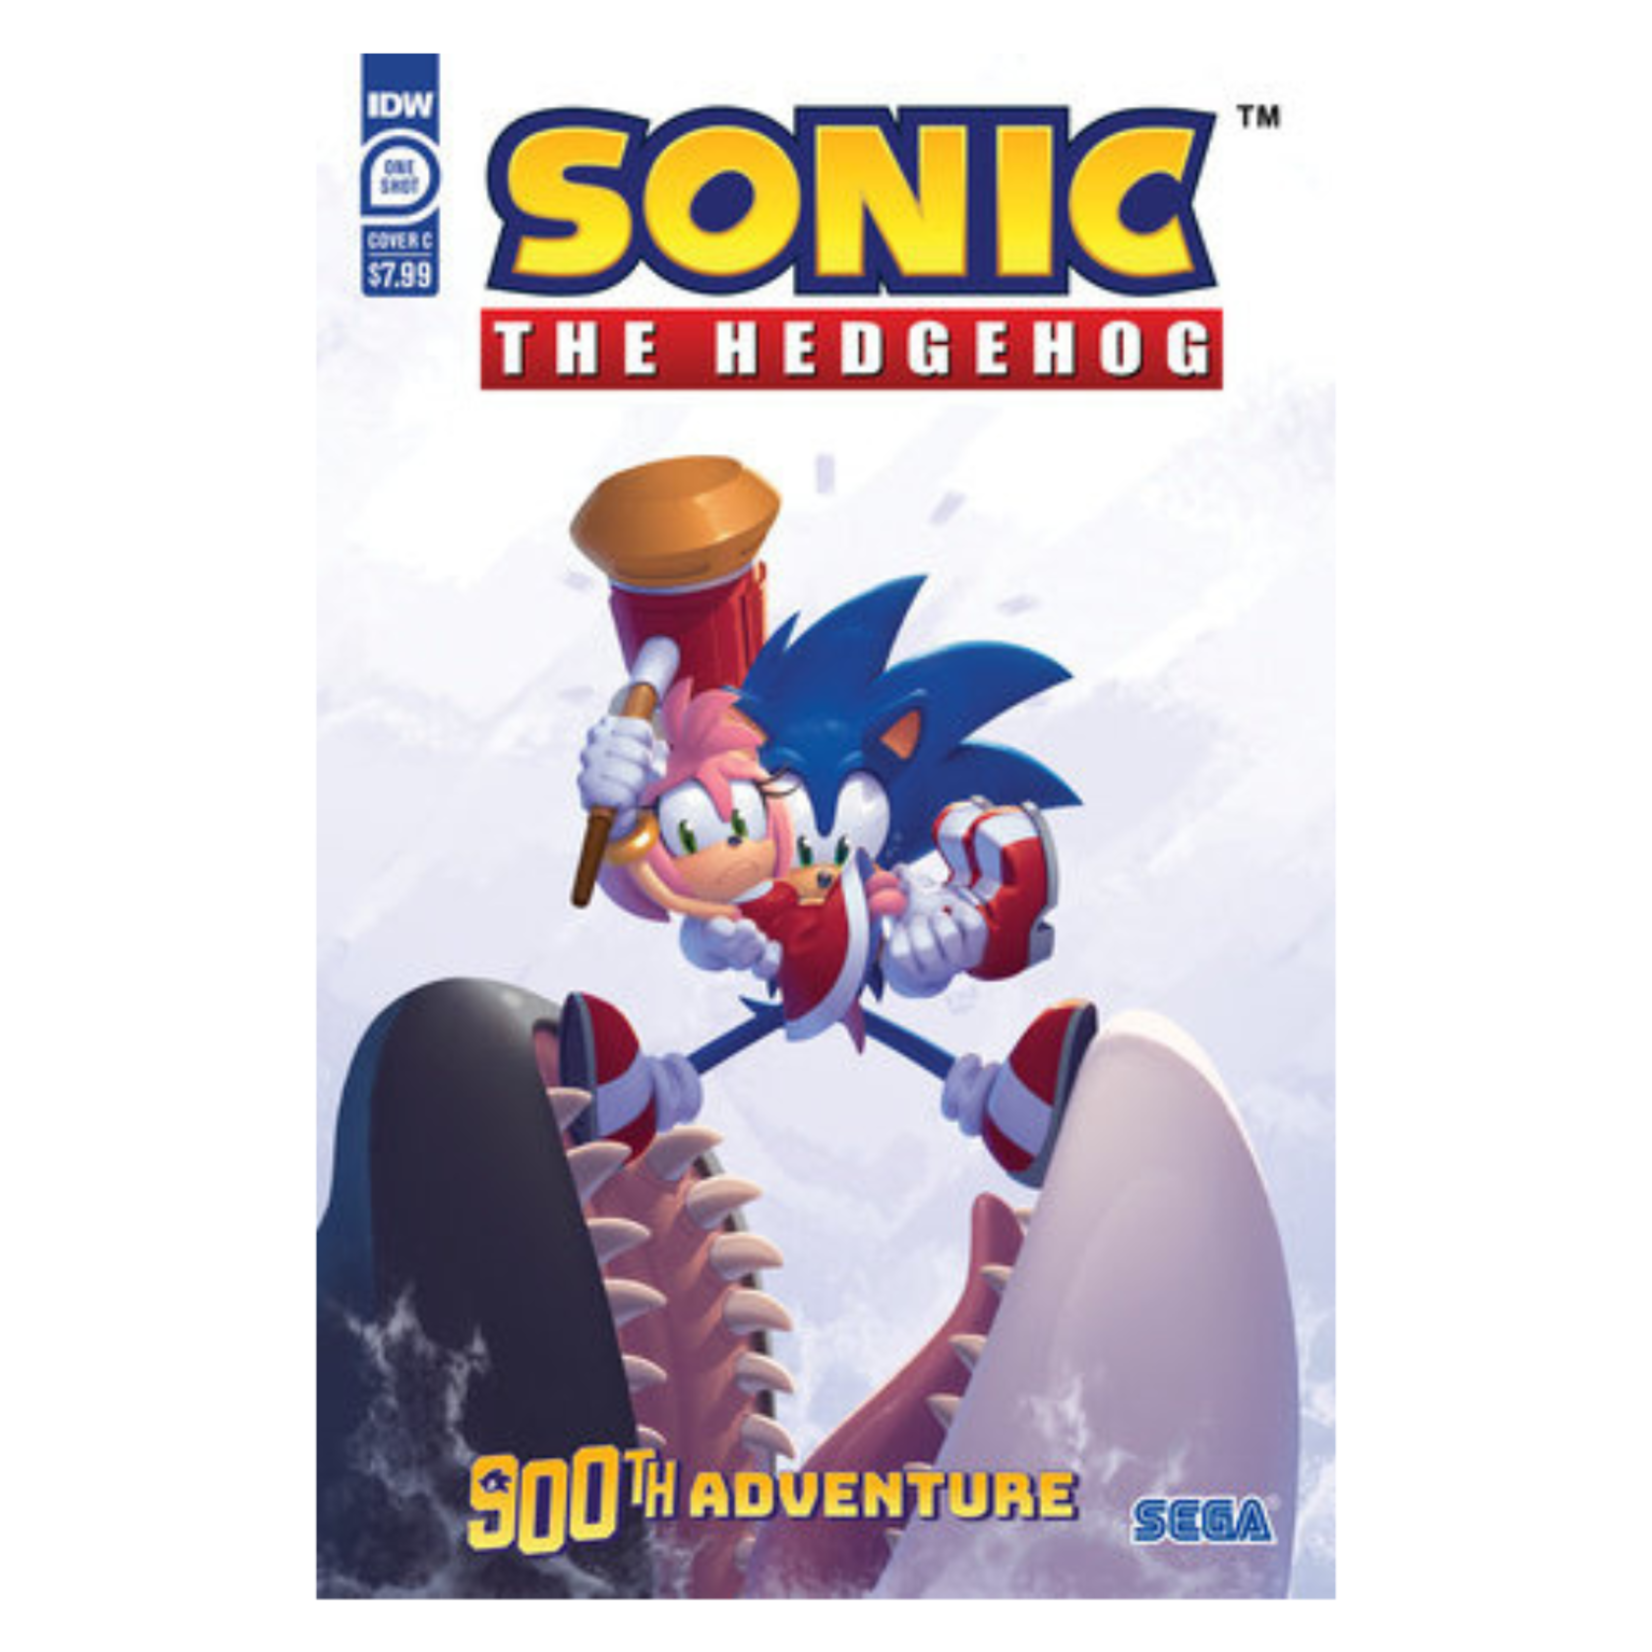 IDW Publishing Sonic the Hedgehog's 900th Adventure Variant C Stanley